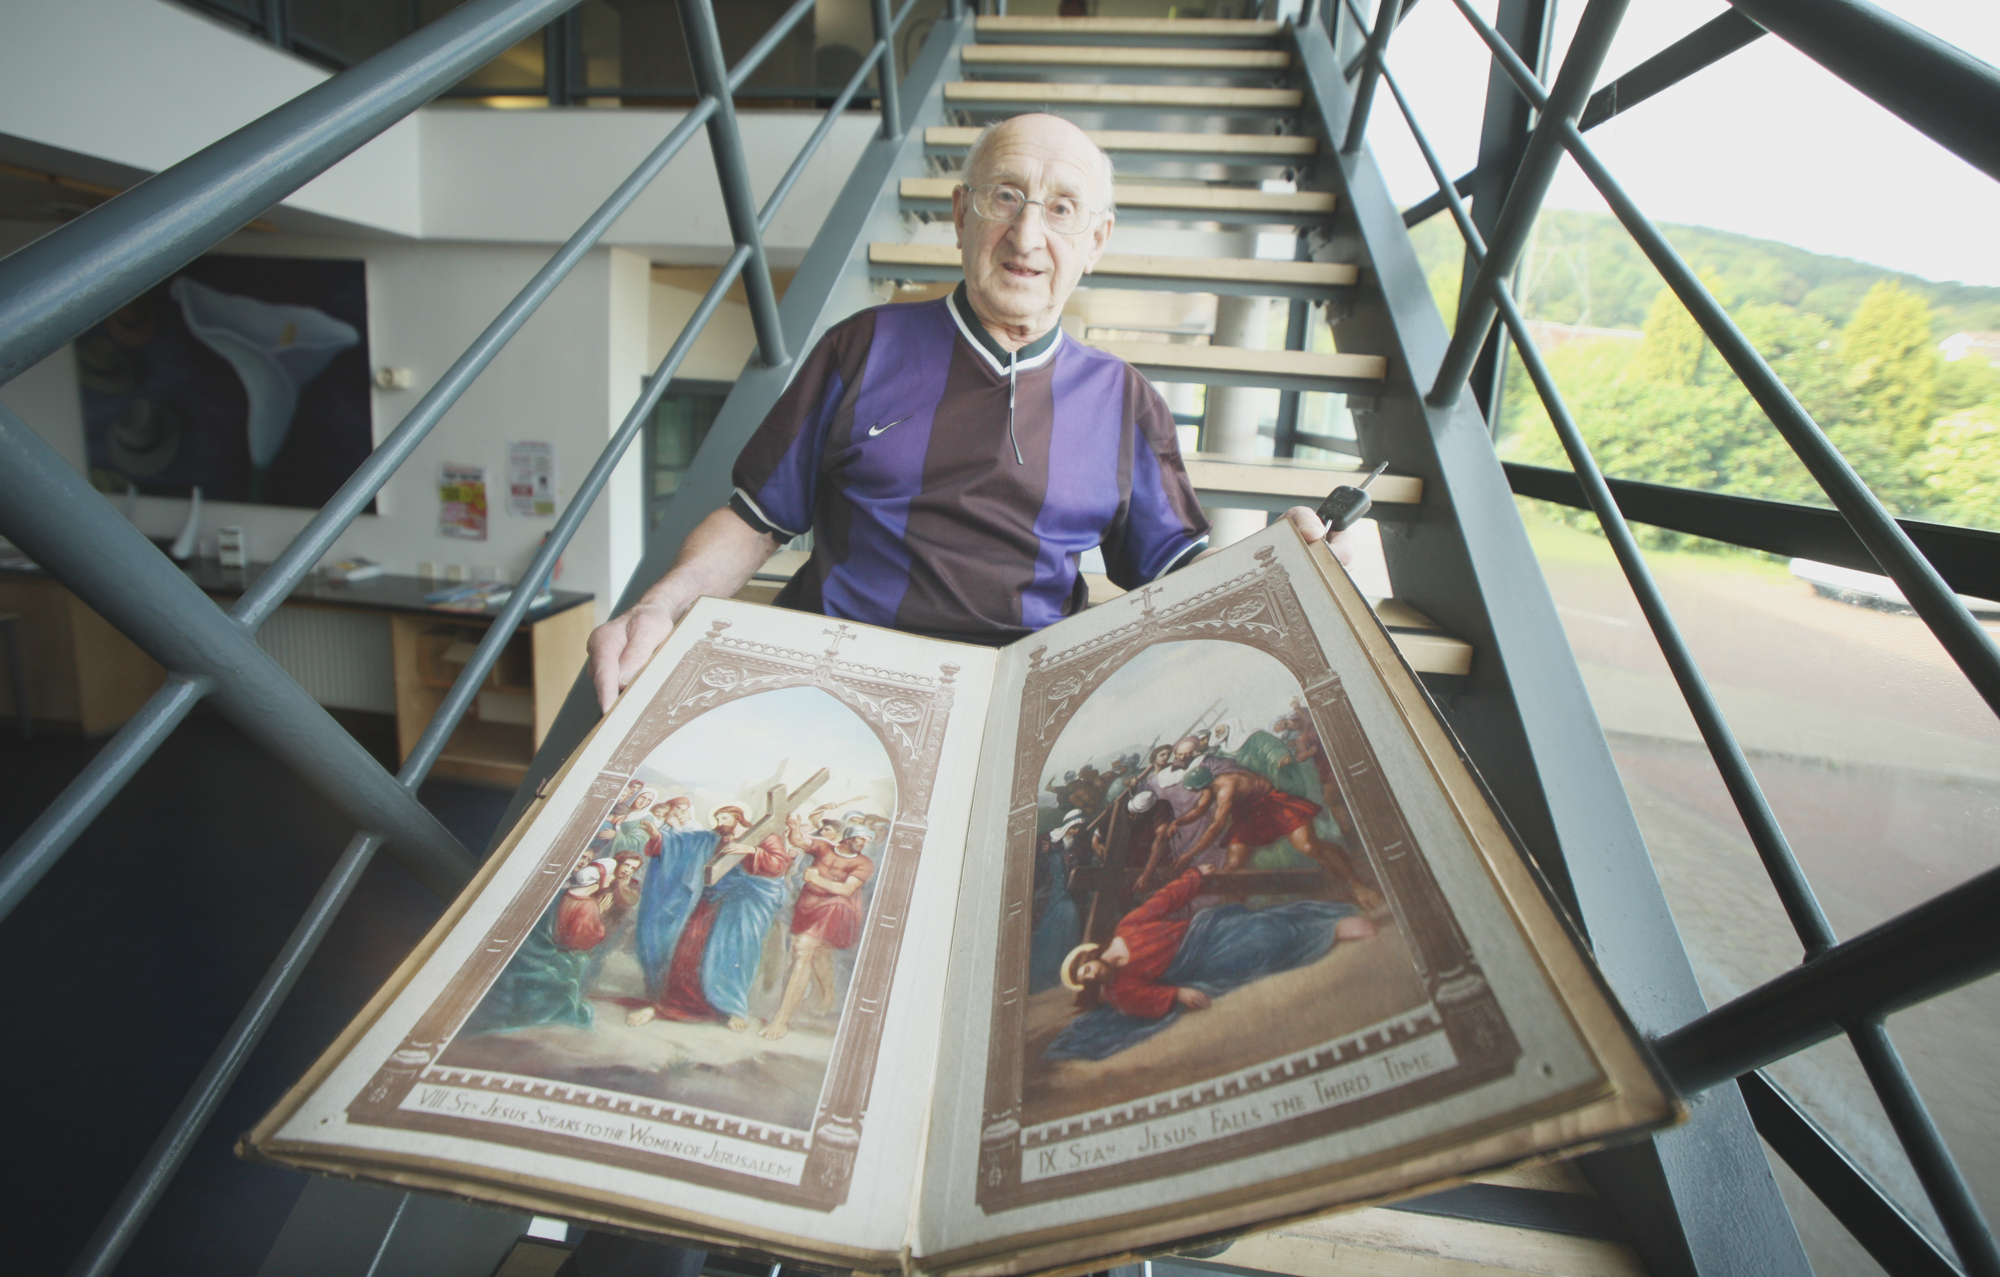 EYECATCHING: Fred Brady with ornate book of religious imagery